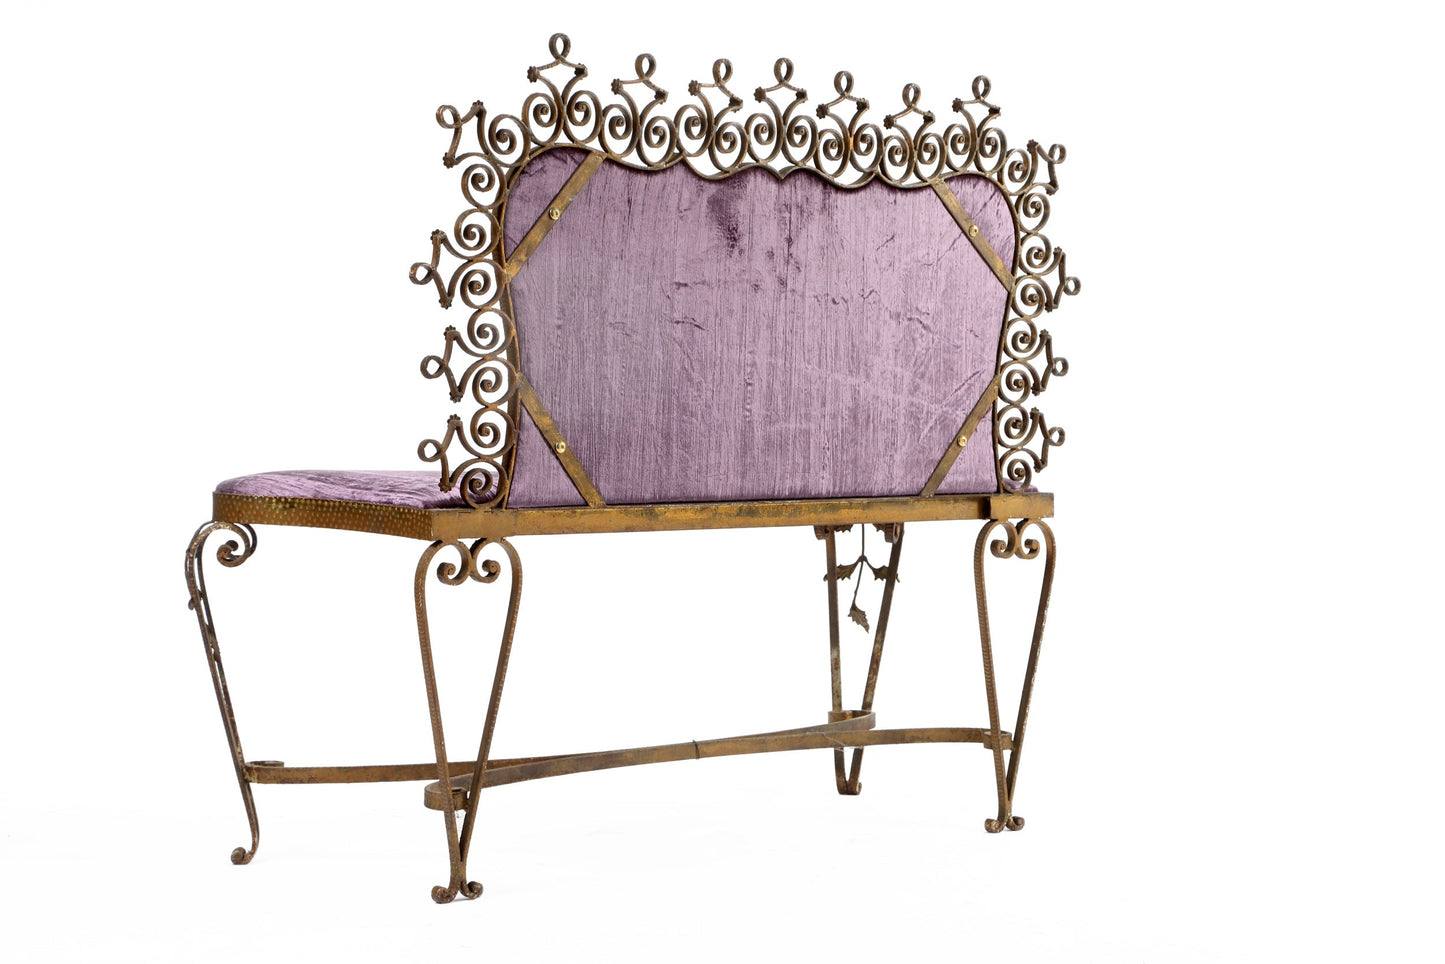 Pier Luigi Colli wrought iron bench from the 1950s